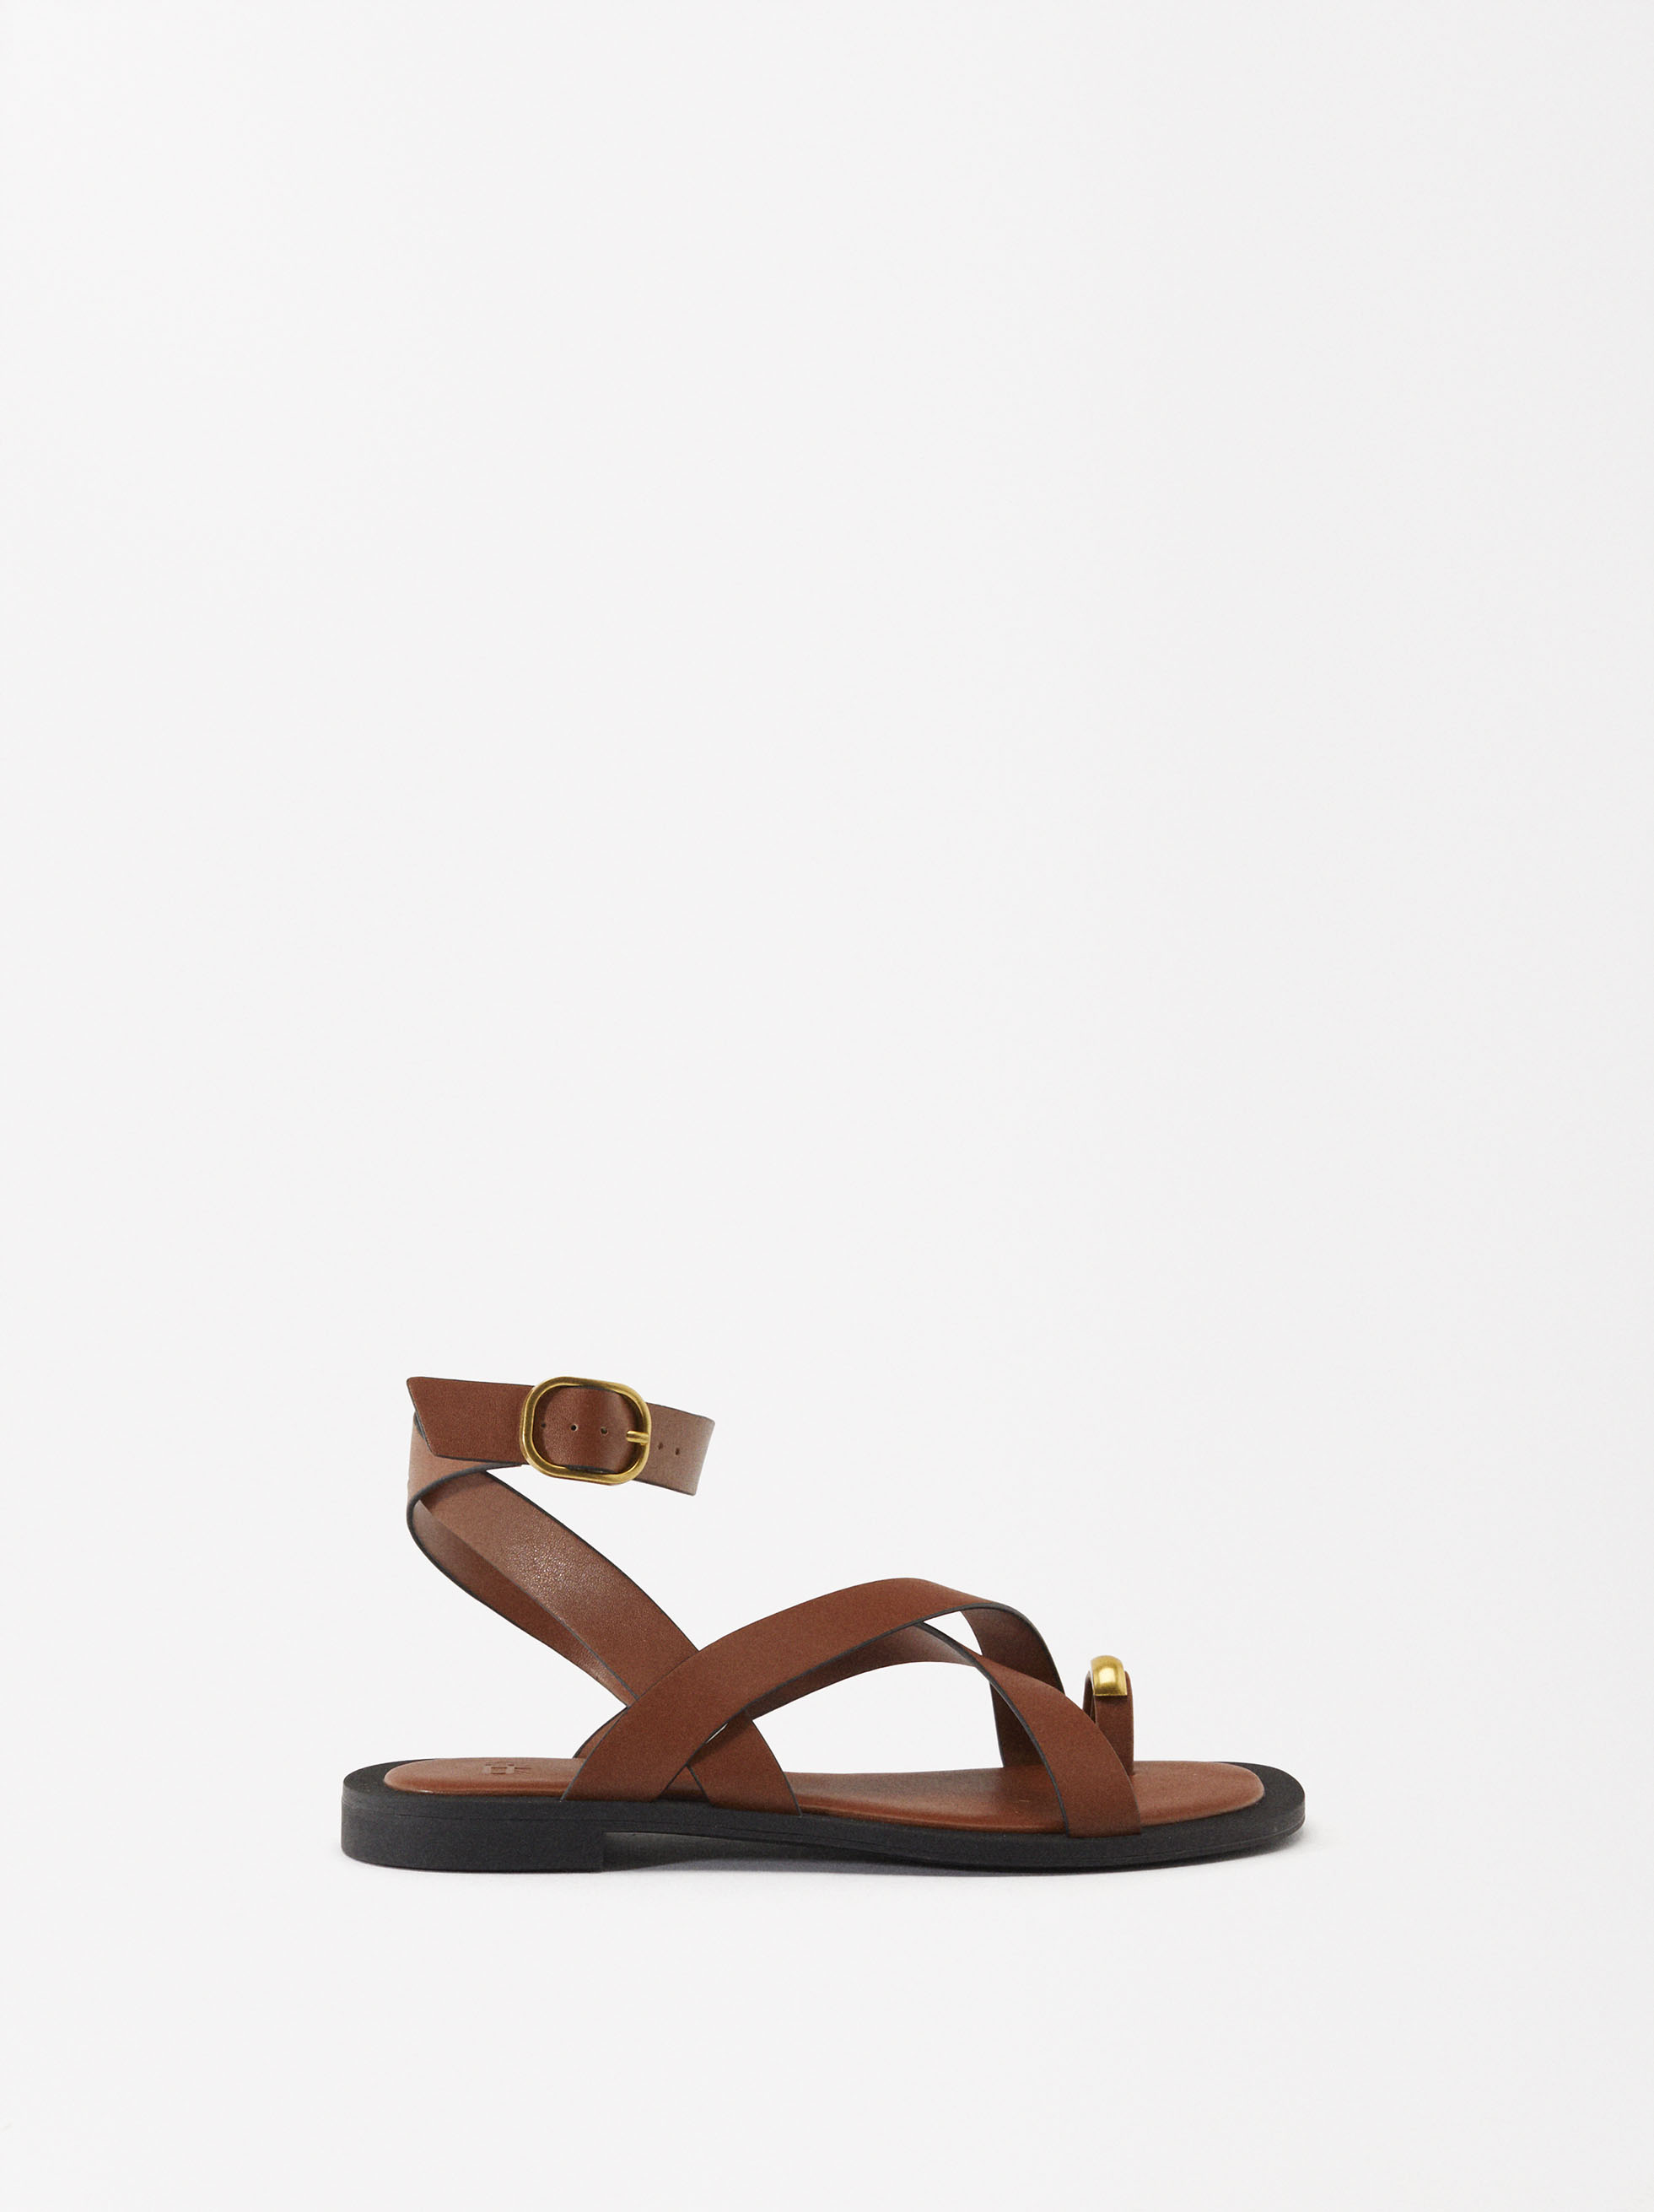 Flat Crossed Sandals With Metallic Detail image number 1.0